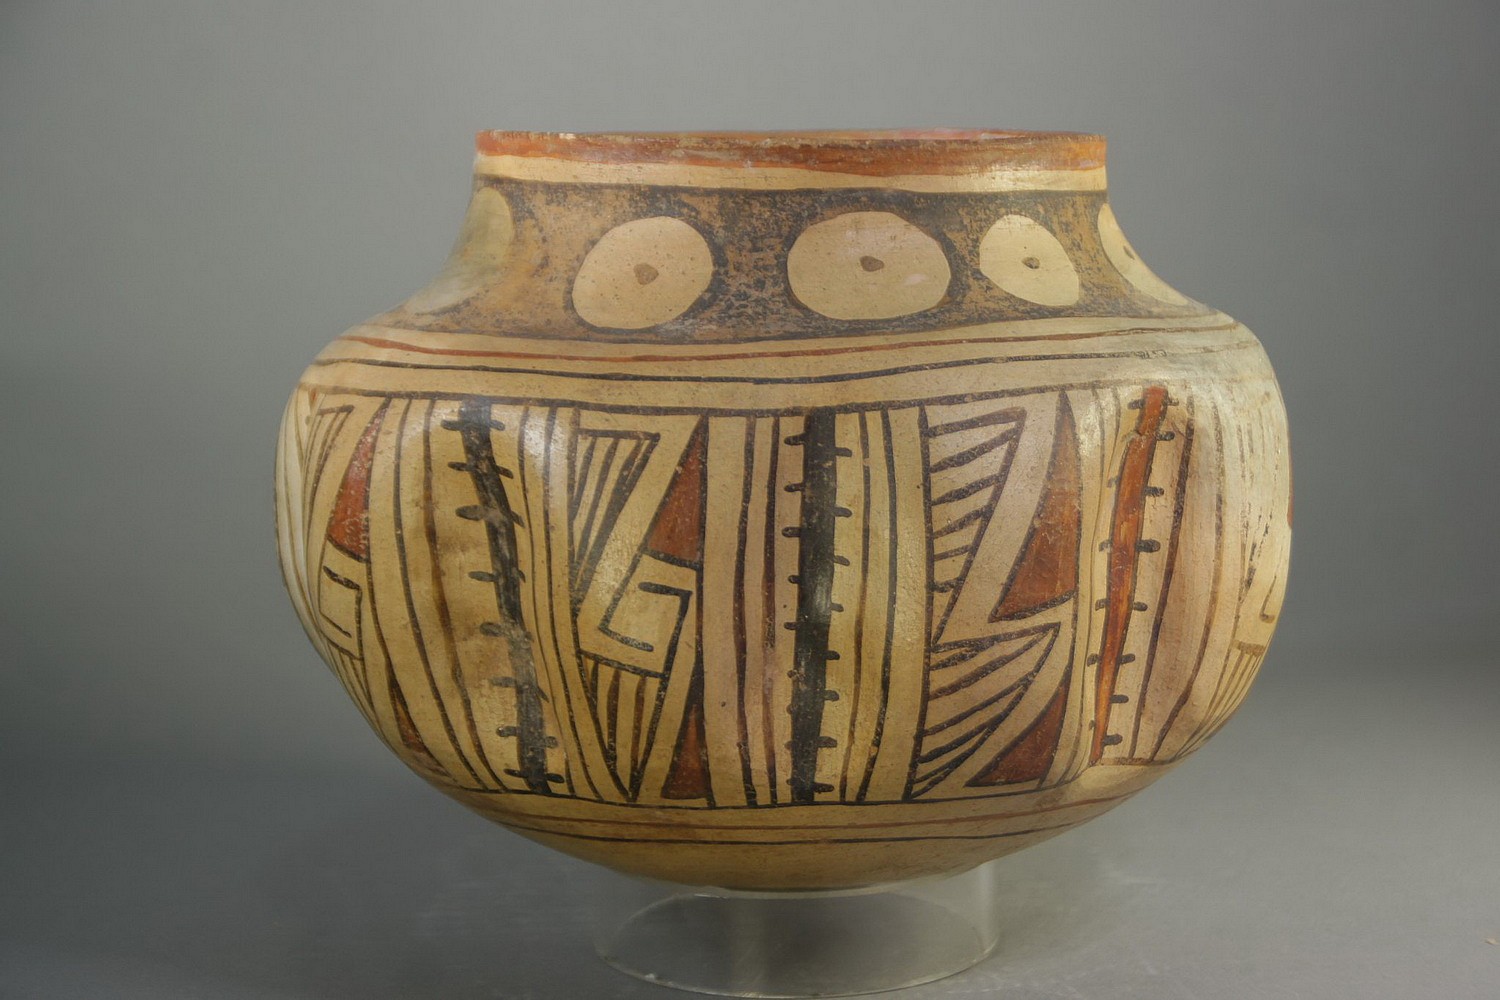 Mexico, Casas Grande Gadrooned Ceramic Vessel with Geometric Designs
This unusual ceramic bowl has nine fluted sections separated by symbolic cacti imagery.  The bowl is painted with red and black geometric designs on a beige ground.  On the bottom are three large concentric black lines.  It has a tapered neck that is decorated with nine beige circles on a black ground.  Each circle has a central black dot, which symbolizes an aerial view of a cactus.  This vessel originates from Casas Grande, a site located in the Mexican state of Chihuahua, along the Casas Grande River and South of the US Puebloan ruins.  A good reference is “Casas Grandes and the Ceramic Art of the Ancient Southwest” by Richard Townsend, published by the Art Institute of Chicago.  The bowl is in good condition with one crack on the bottom restored and a small hole on one of the fluted sections.
All parts original.
Media: Ceramic
Dimensions: H. 6" x W. 8"
$2,900
n2046